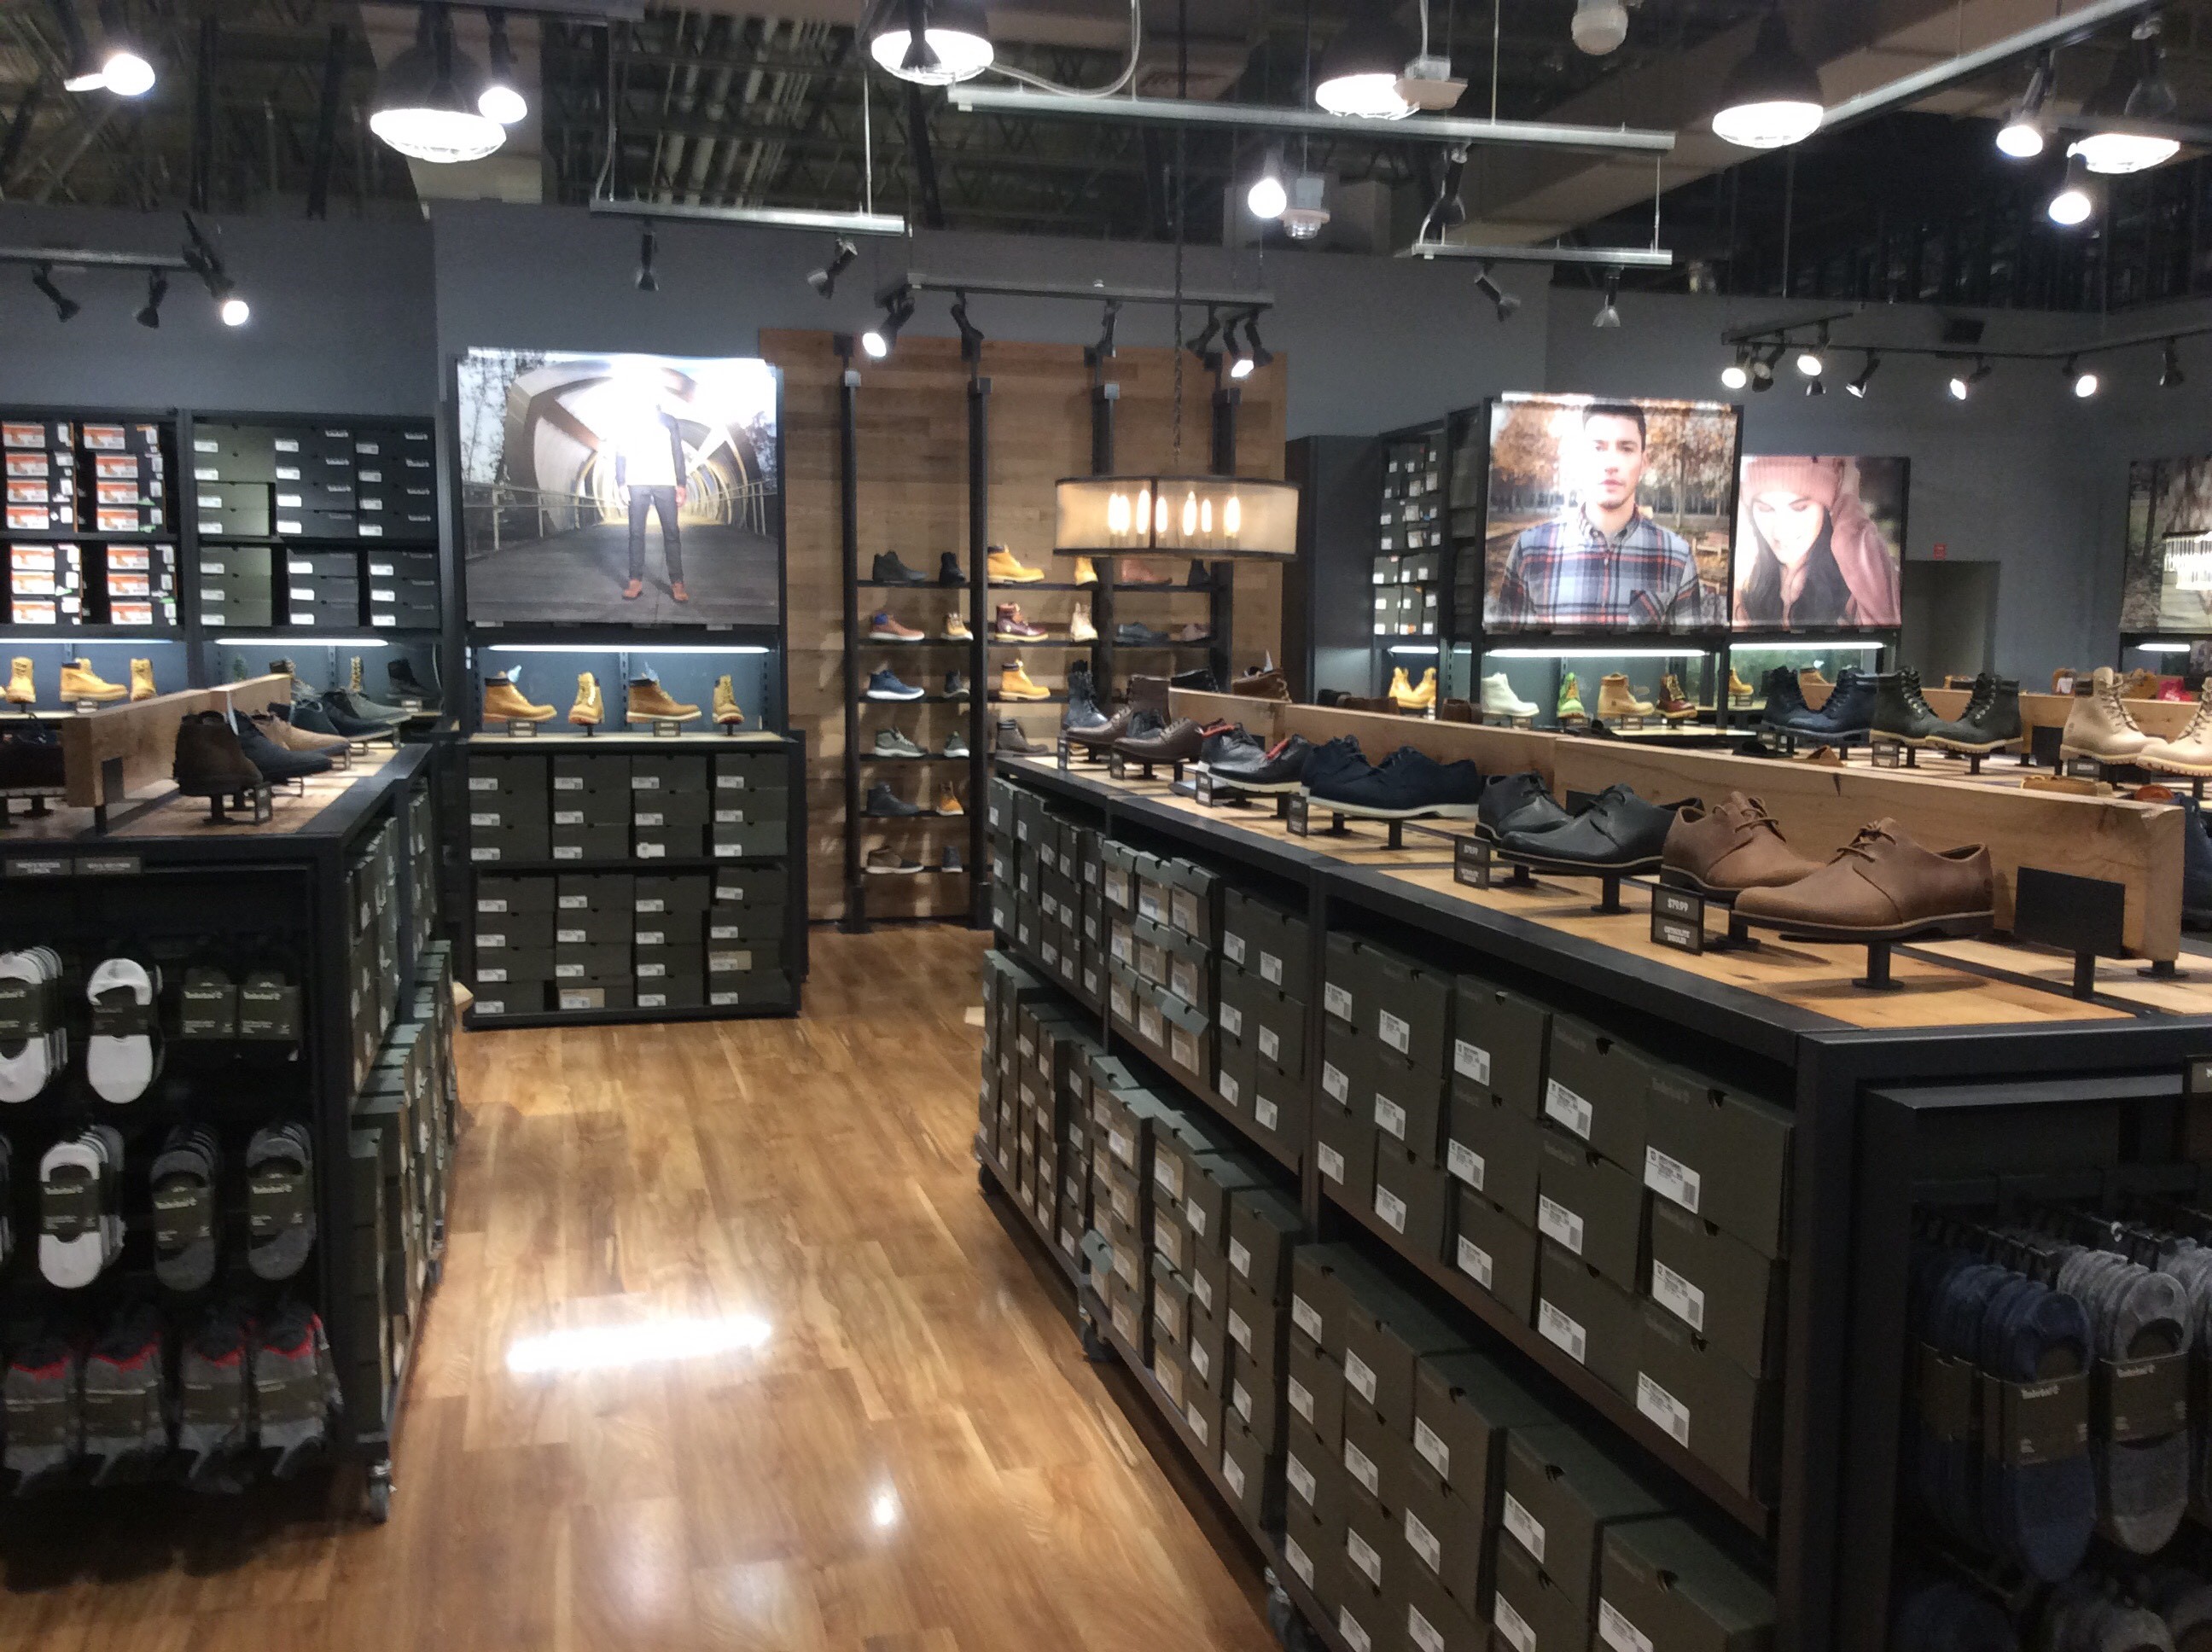 Timberland - Boots, Shoes, Clothing & Accessories in Sunrise, FL